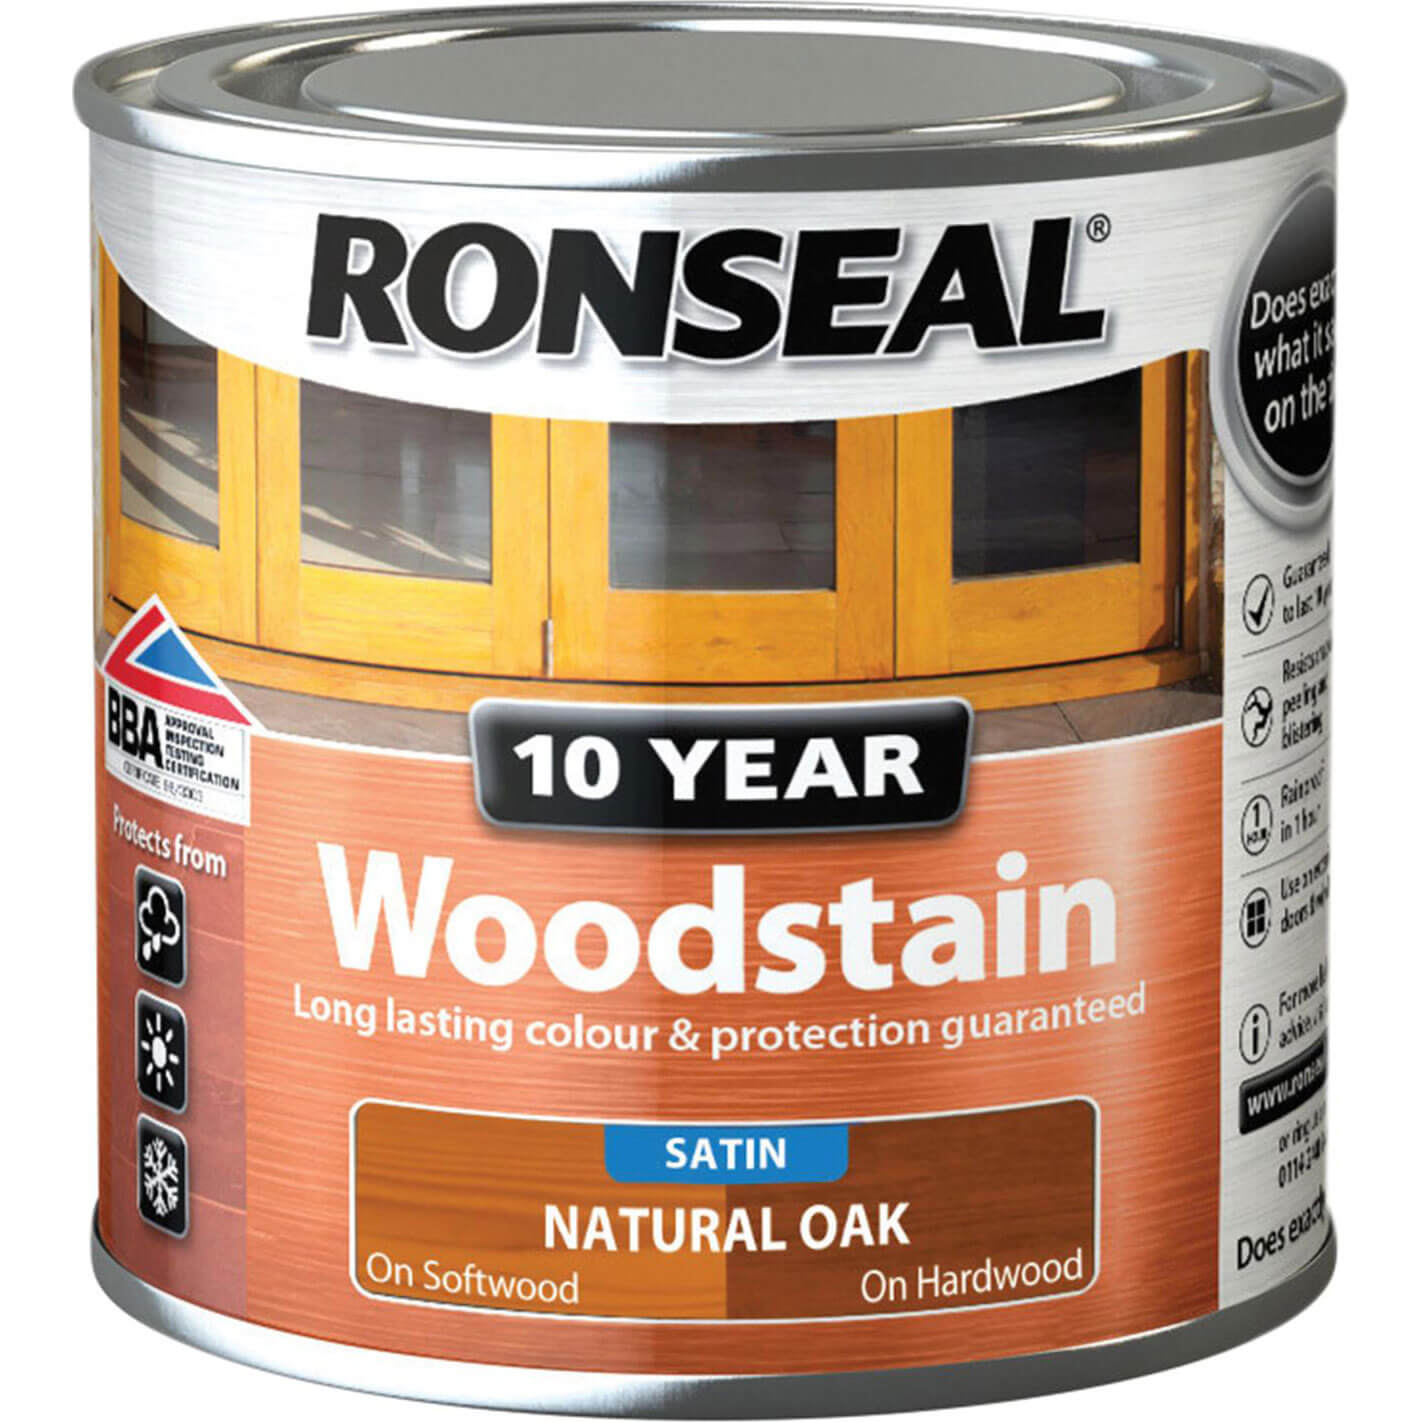 Image of Ronseal 10 Year Wood Stain Natural Oak 250ml